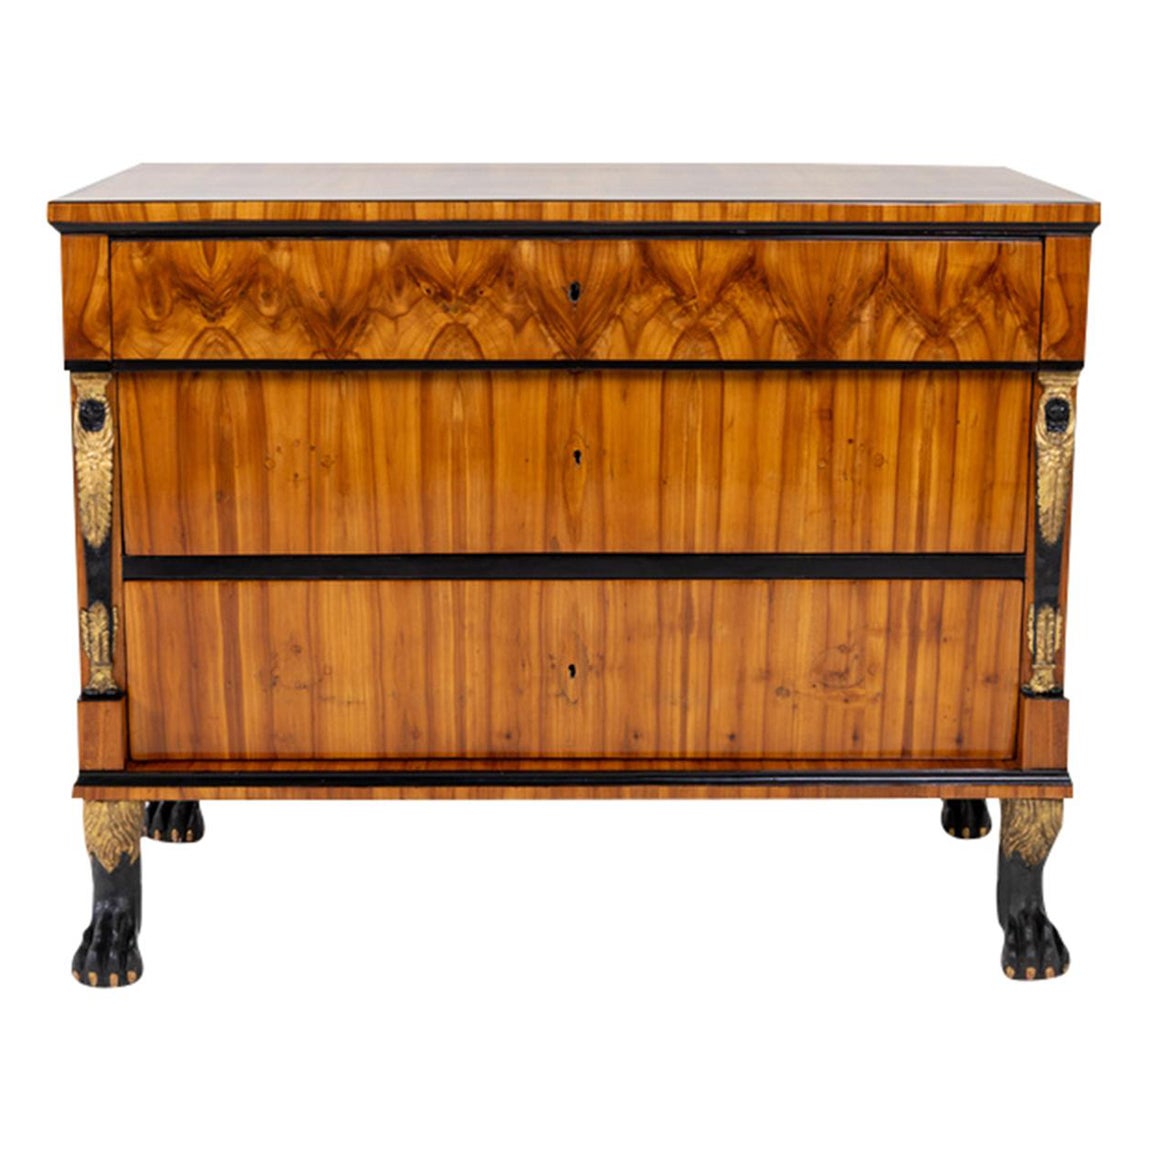 19th Century German Biedermeier Cherrywood Chest of Drawers - Antique Commode For Sale